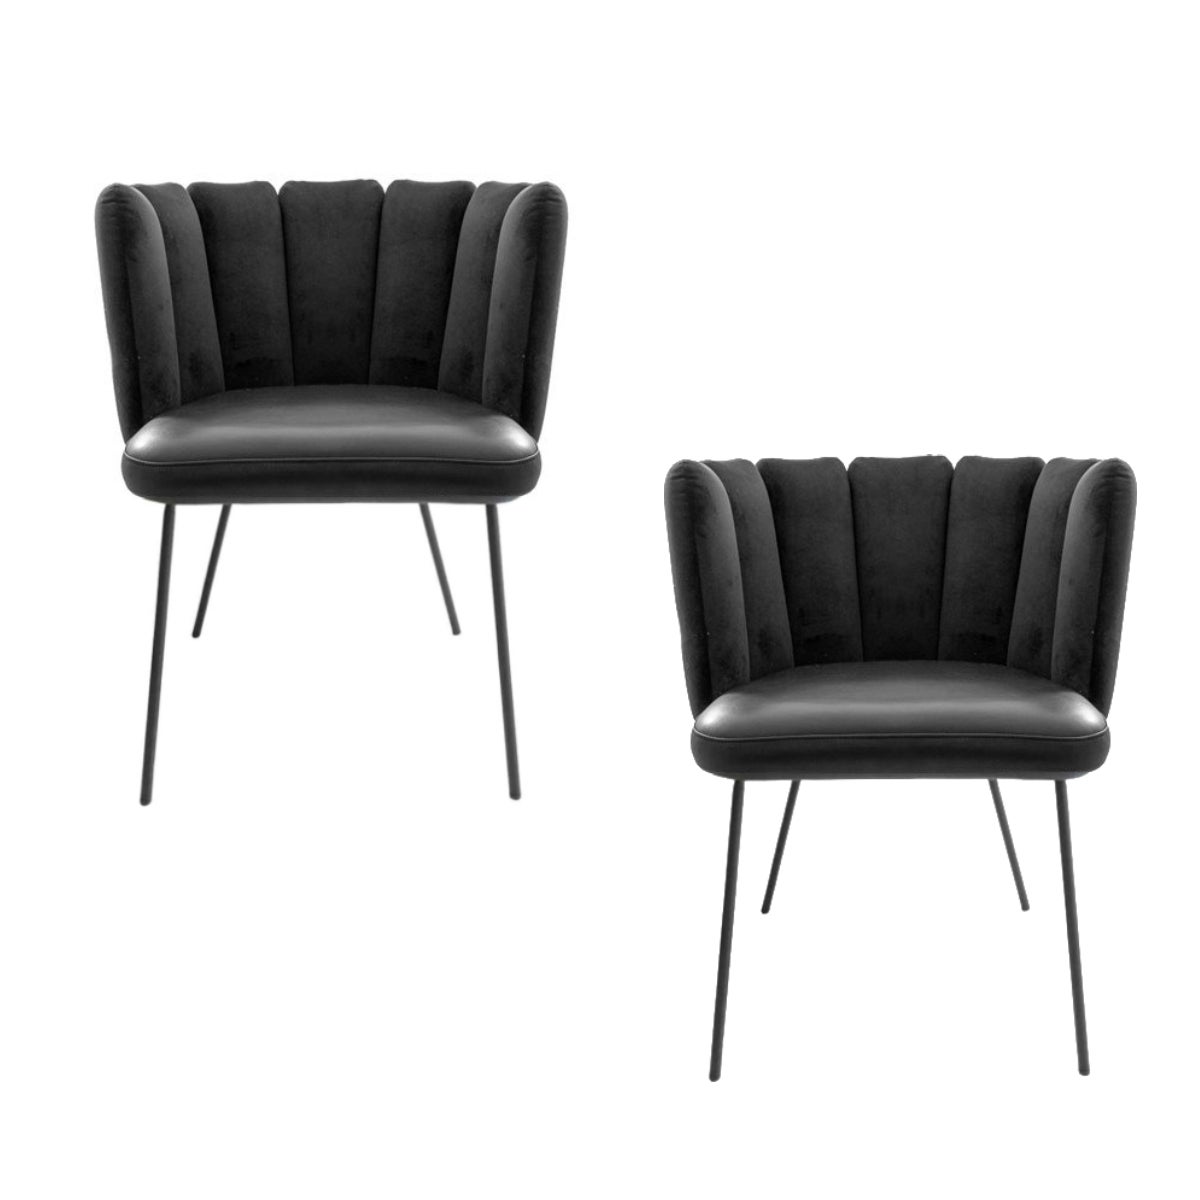 In Stock in Los Angeles, Set of 2 Black Gaia Velvet Dining Chairs '7-Back'